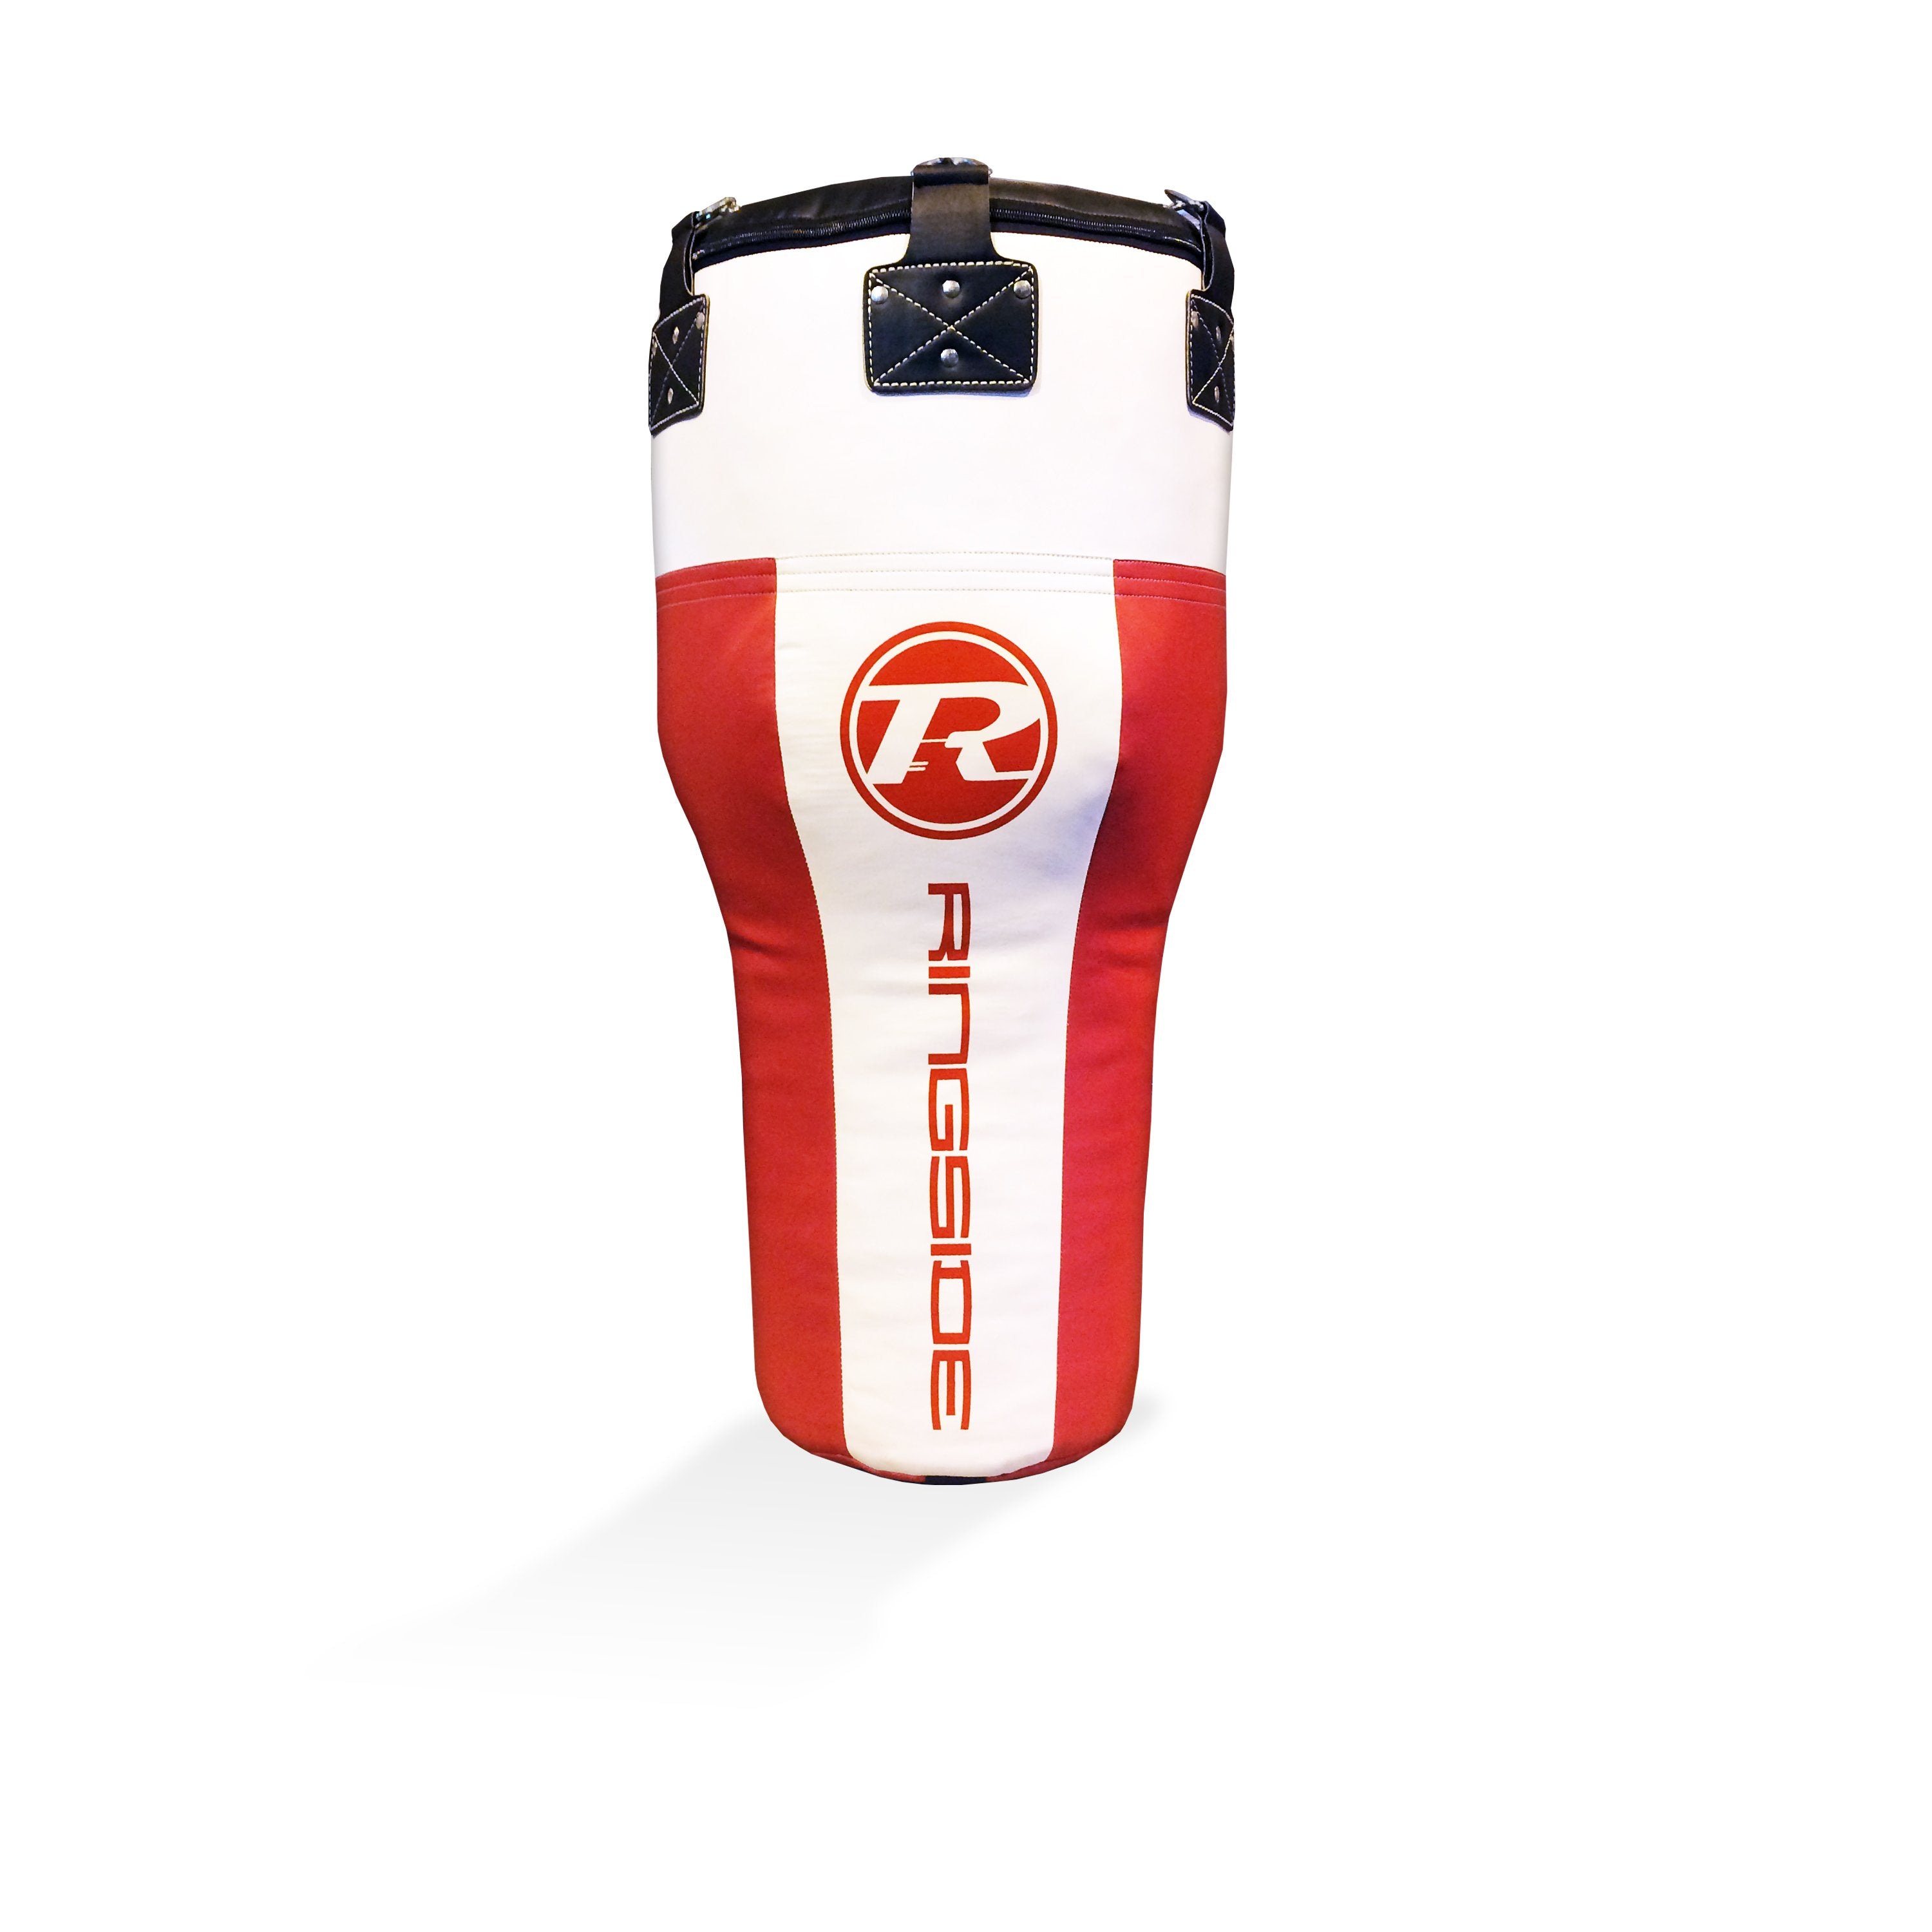 Synthetic Leather Angle Punch Bag - Red / White